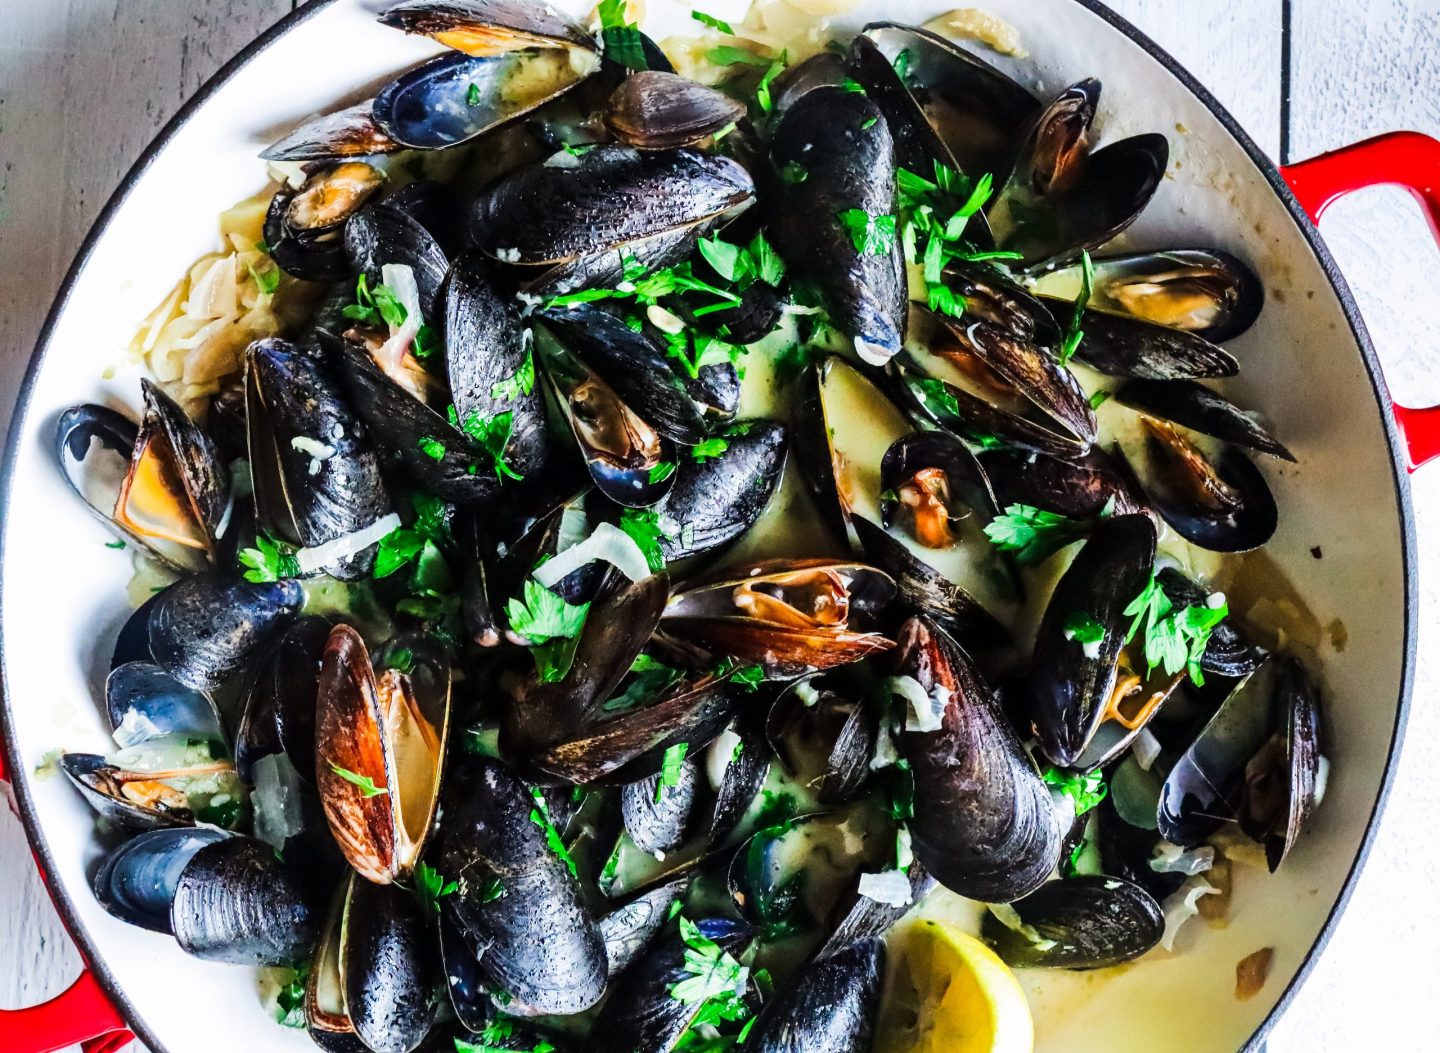 steamed mussels in a creamy garlic and white wine sauce on www.thedanareneeway.com